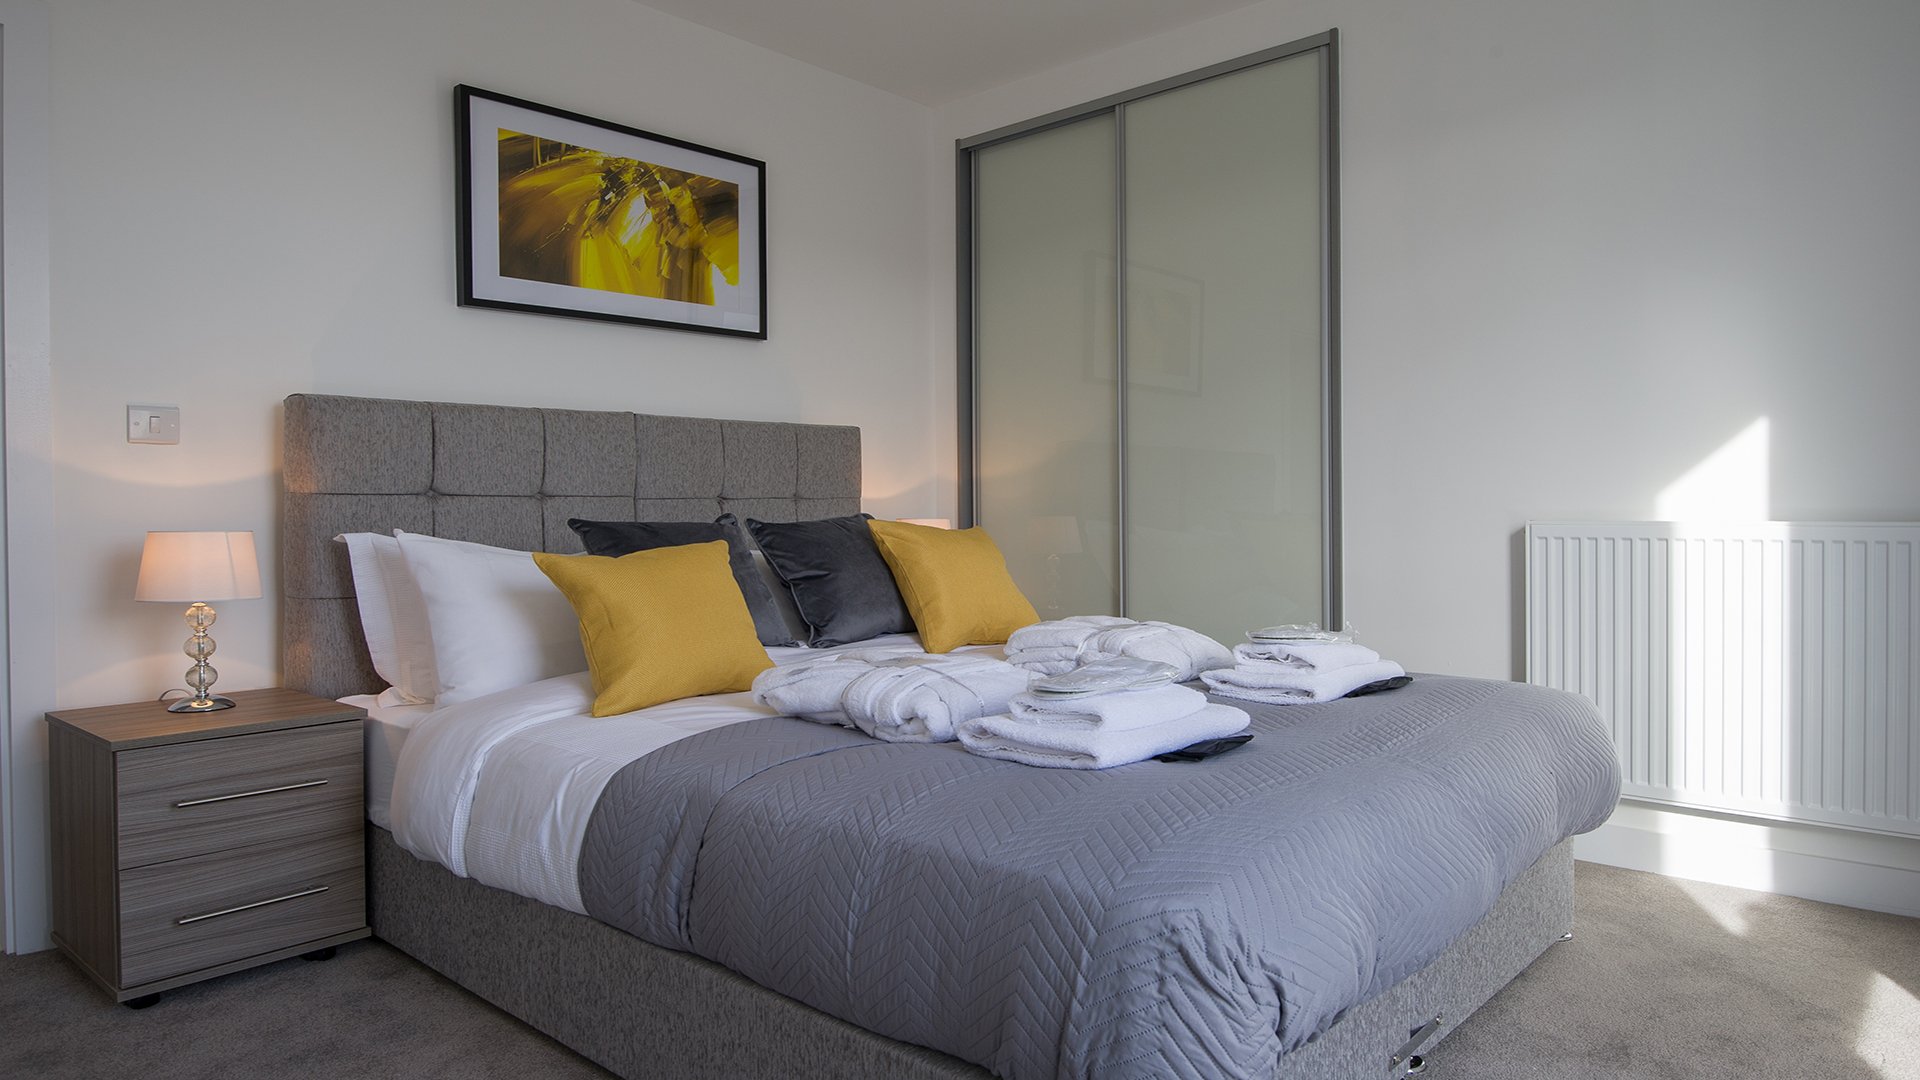 Serviced-Apartments-Cambridge-avilable-for-Short-Lets-Now!!-Book-Corporate-Accommodation-in-Cambridge-Trumpington-today!-Free-Cleaning,-Wifi-&-Netflix!!